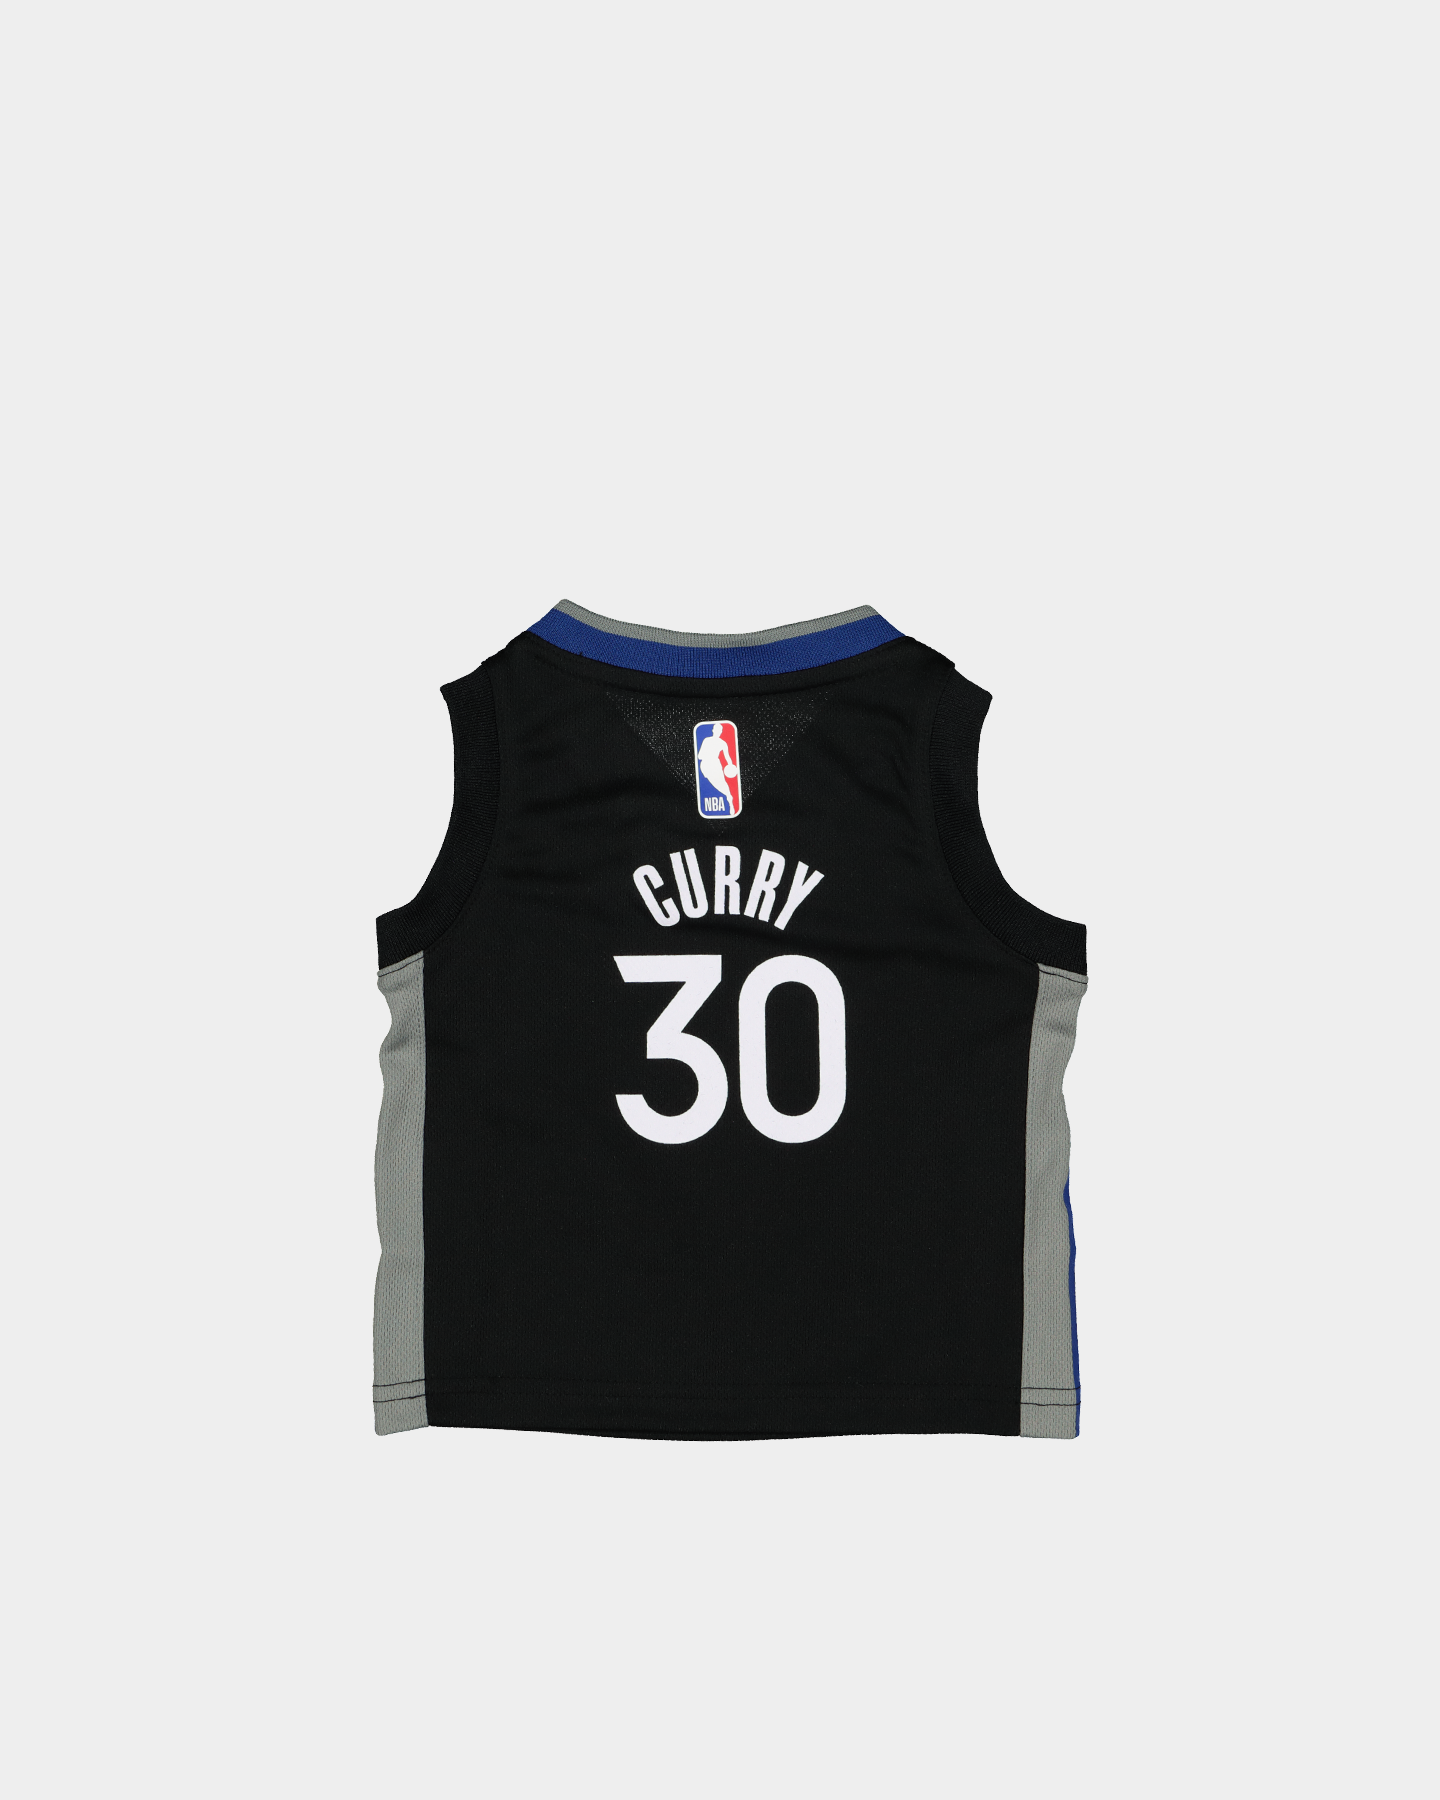 stephen curry black and white jersey